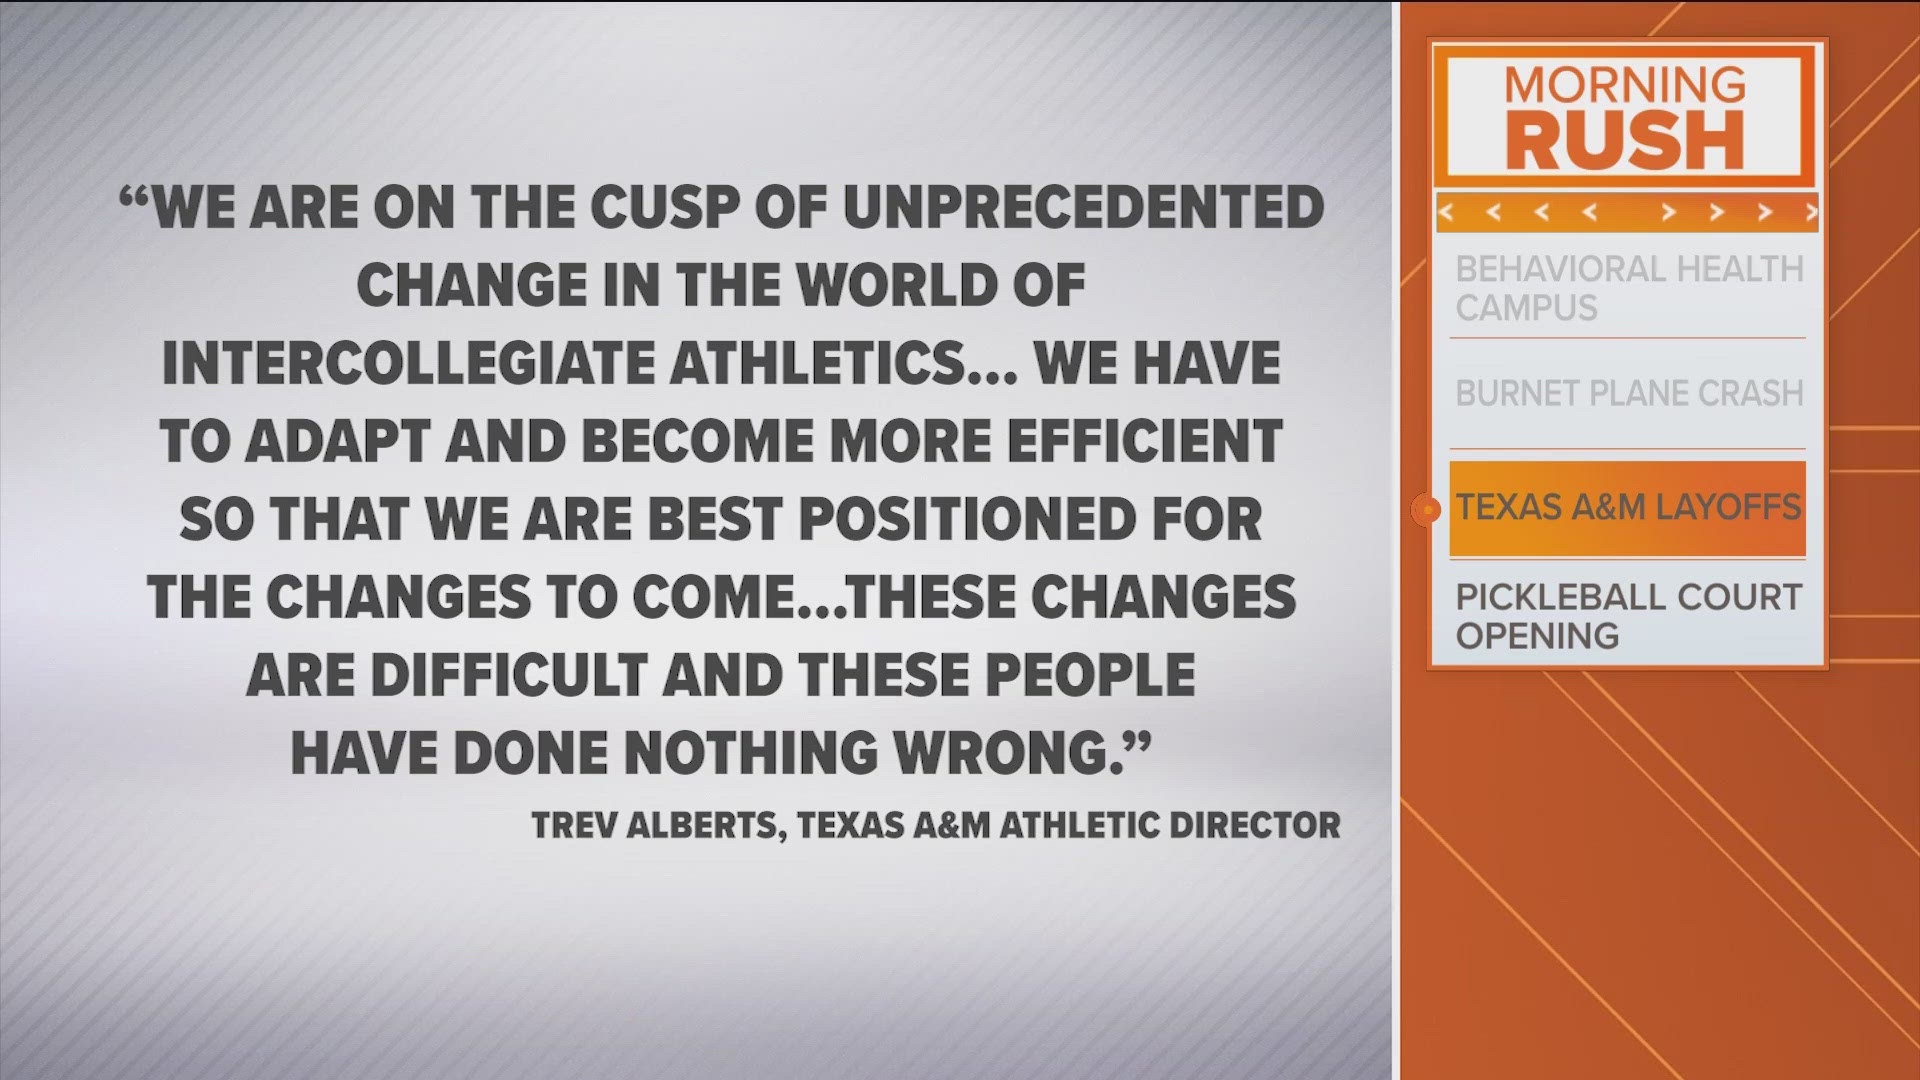 "These changes are difficult and these people have done nothing wrong," Texas A&M athletic director Trev Alberts said in a statement.